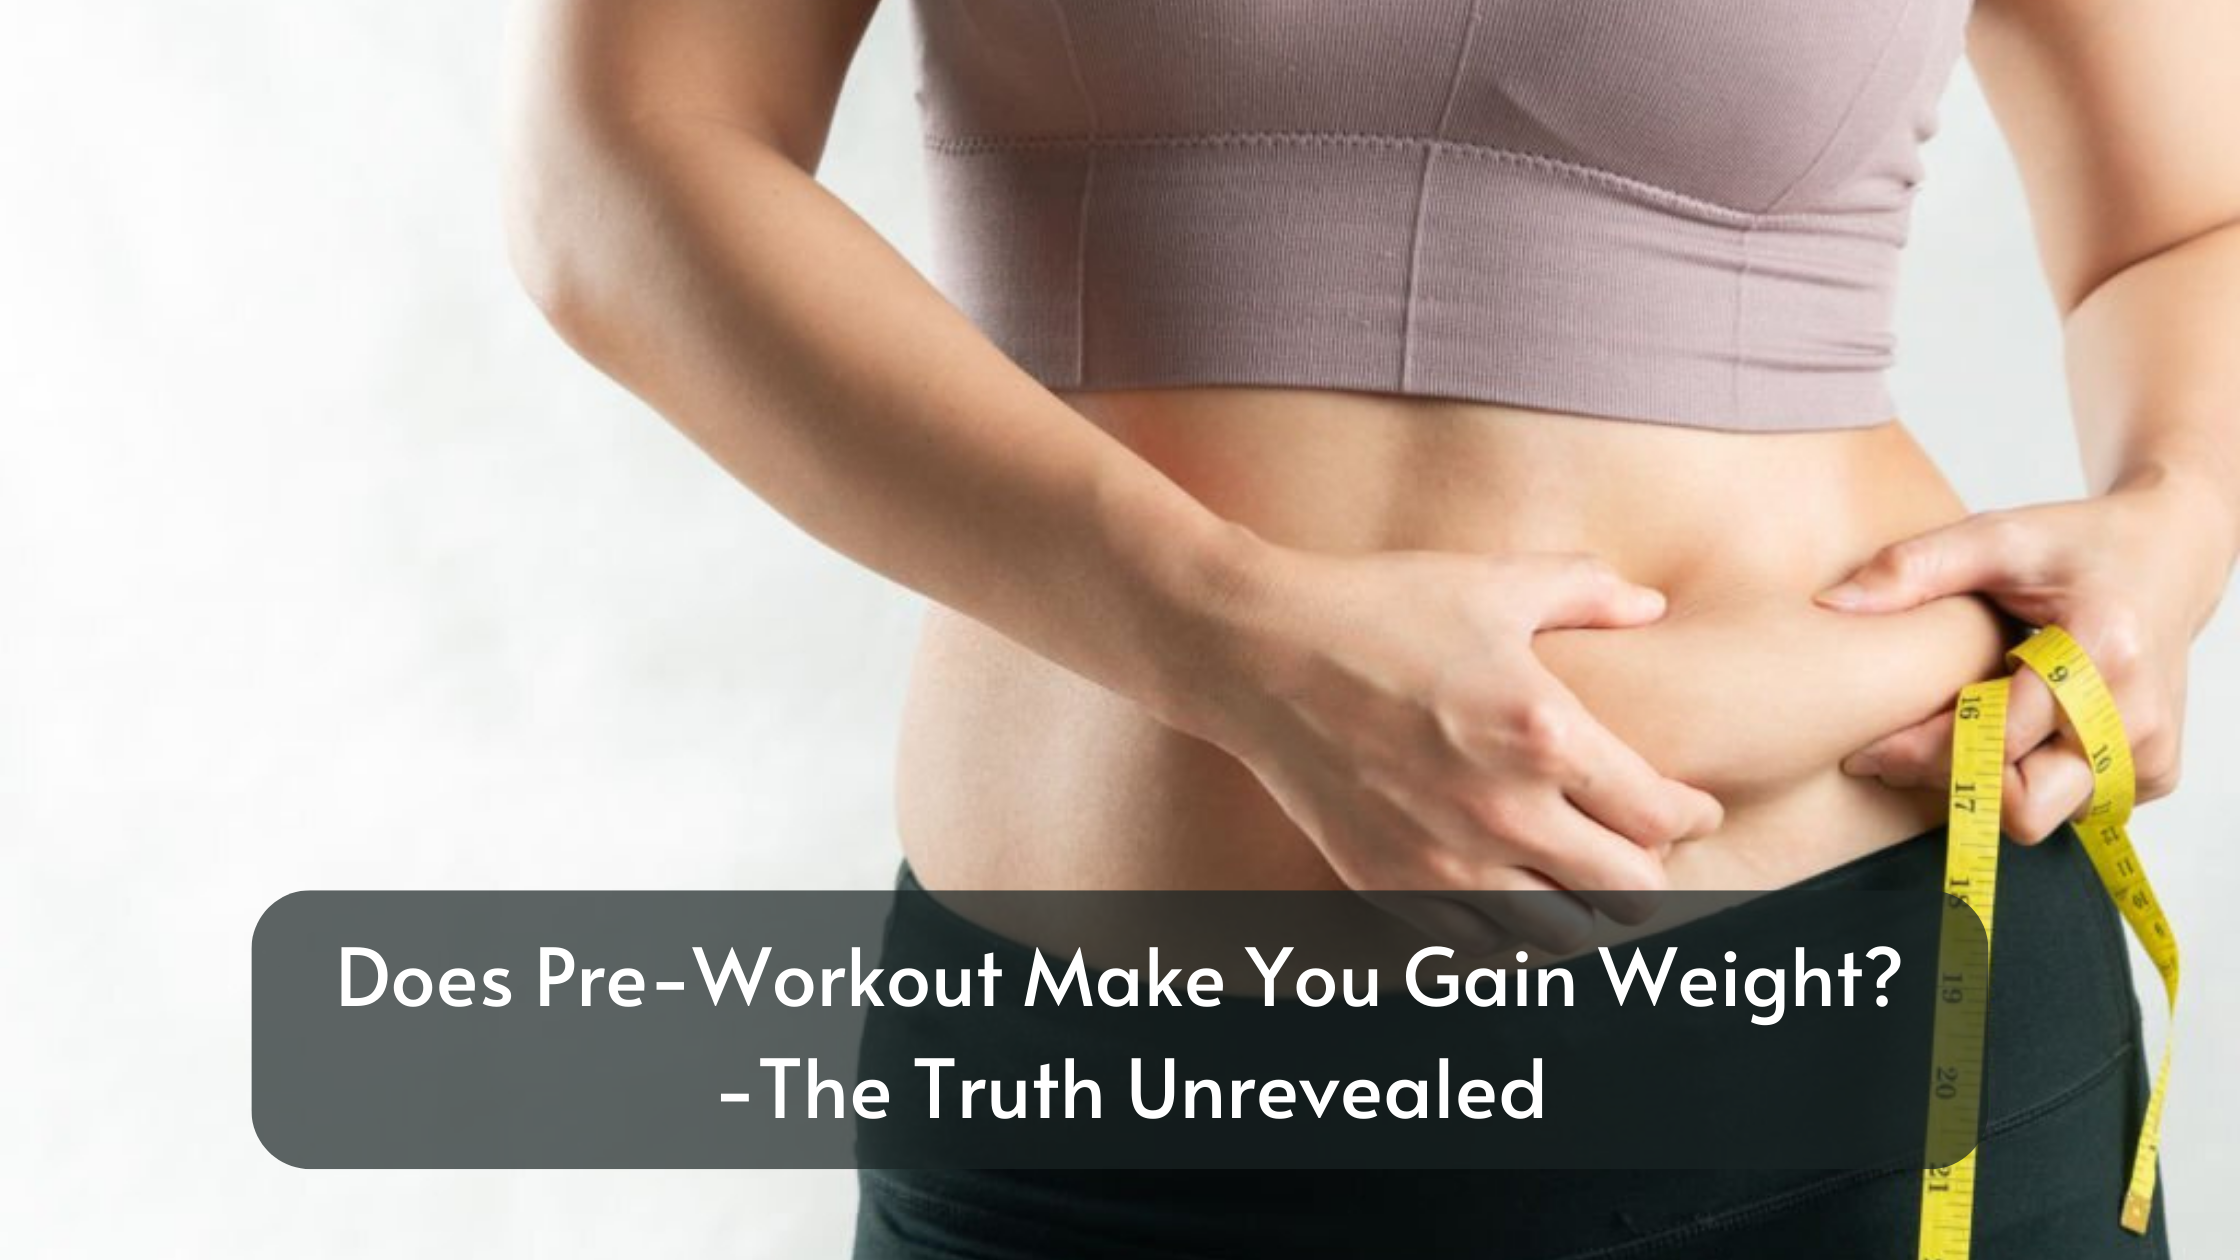 Does Pre-Workout Make You Gain Weight?